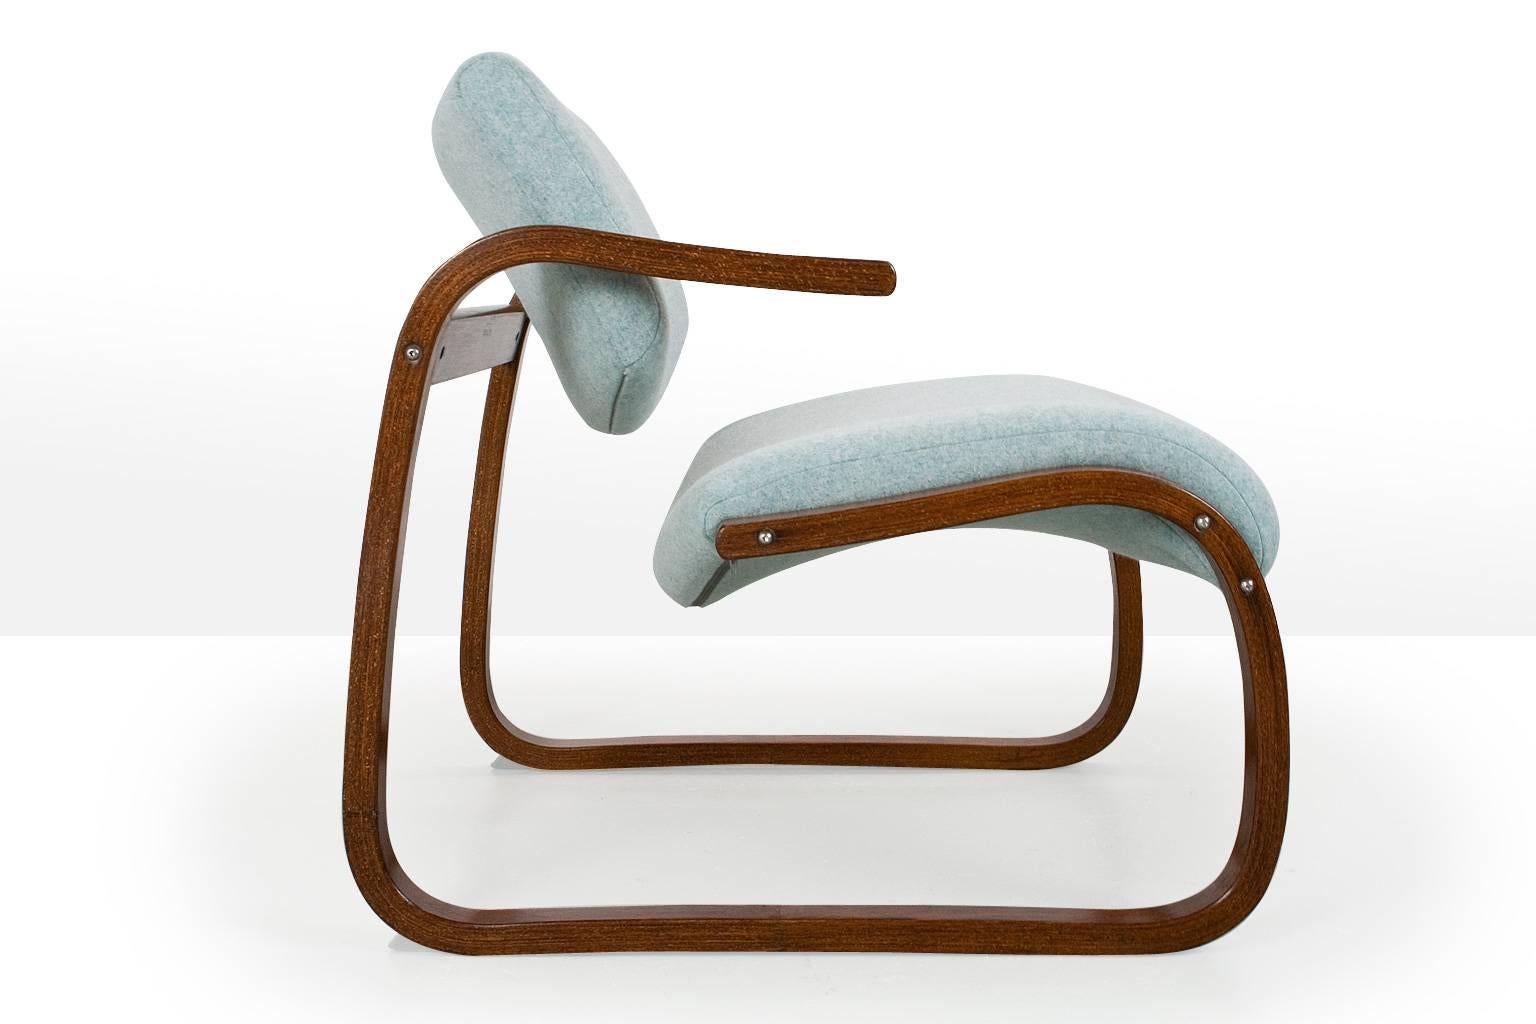 Transparant, bent and curve Scandinavian design from Norway. A great and very comfortable piece by Oddvin Rykken, 1970s. The frame is made of bent beech, stained and varnished. This comfortable piece is reupholstered in a soft light blue felt